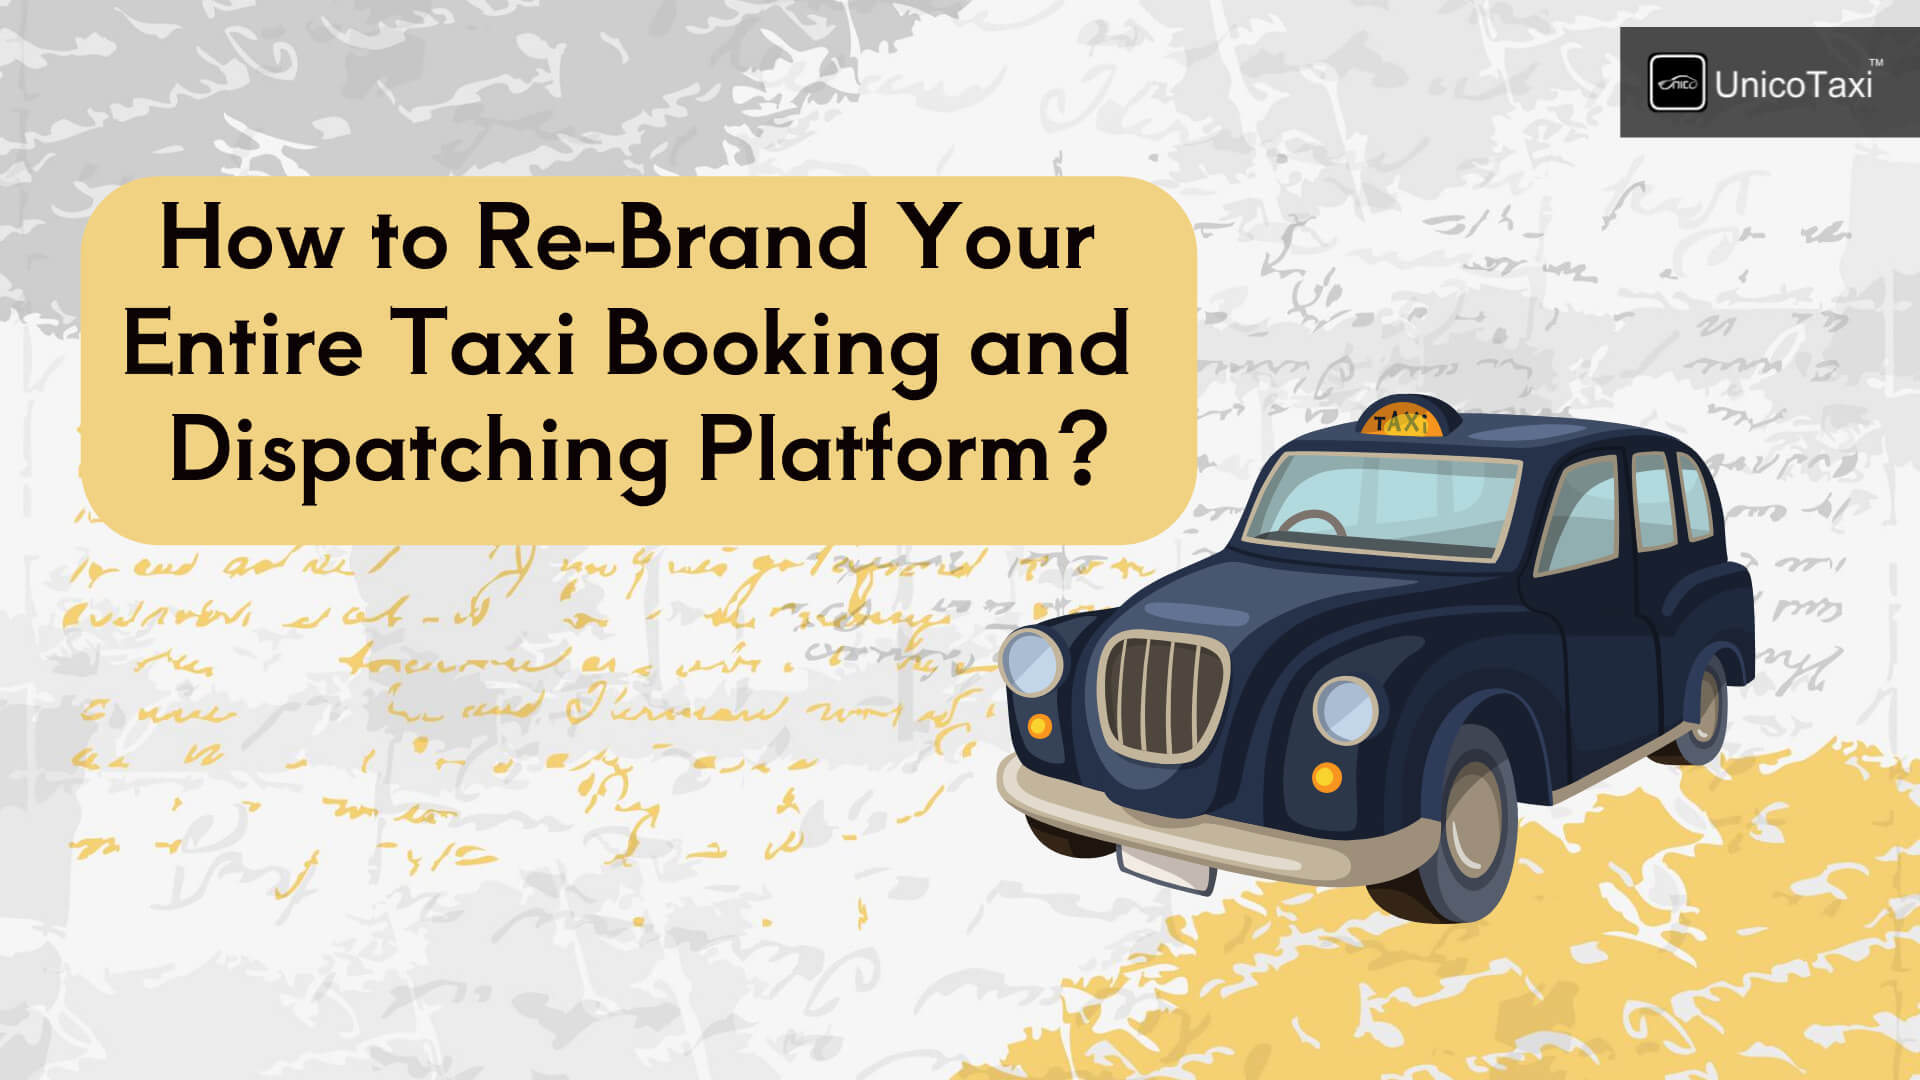 How to Re-Brand Your Entire Taxi Booking and Dispatching Platform?